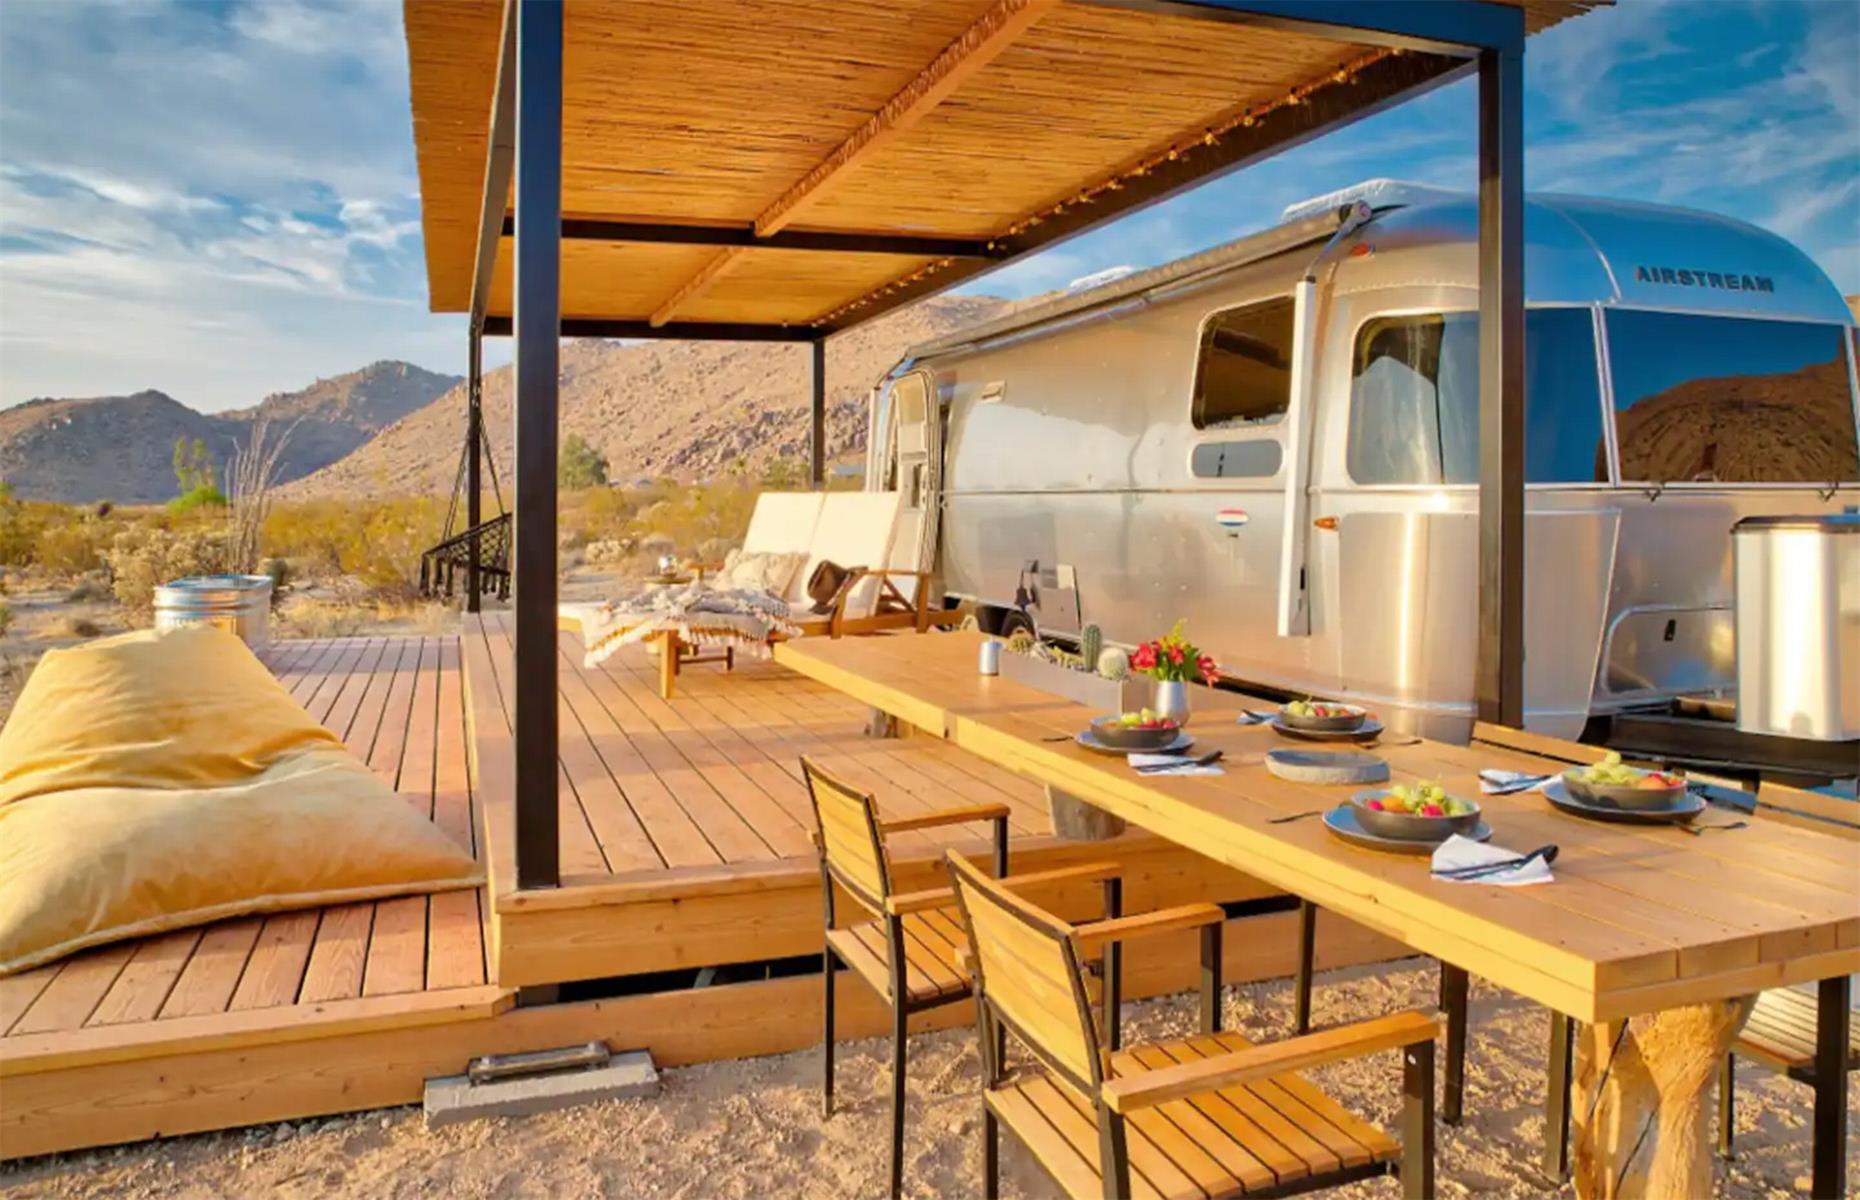 <p>If you’re seeking the ultimate desert retreat, look no further than this fabulous refurbished <a href="https://www.airbnb.co.uk/rooms/44403770">27-foot Airstream</a>, situated near Joshua Tree National Park.</p>  <p>With its incredibly sleek interior, this Airstream is more reminiscent of a five-star hotel than a tiny home on wheels.</p>  <p>It offers a refrigerator with a freezer, a gas hob, oven, microwave, Nespresso coffee machine, toilet and shower, as well as all the amenities you need for a relaxing stay.</p>